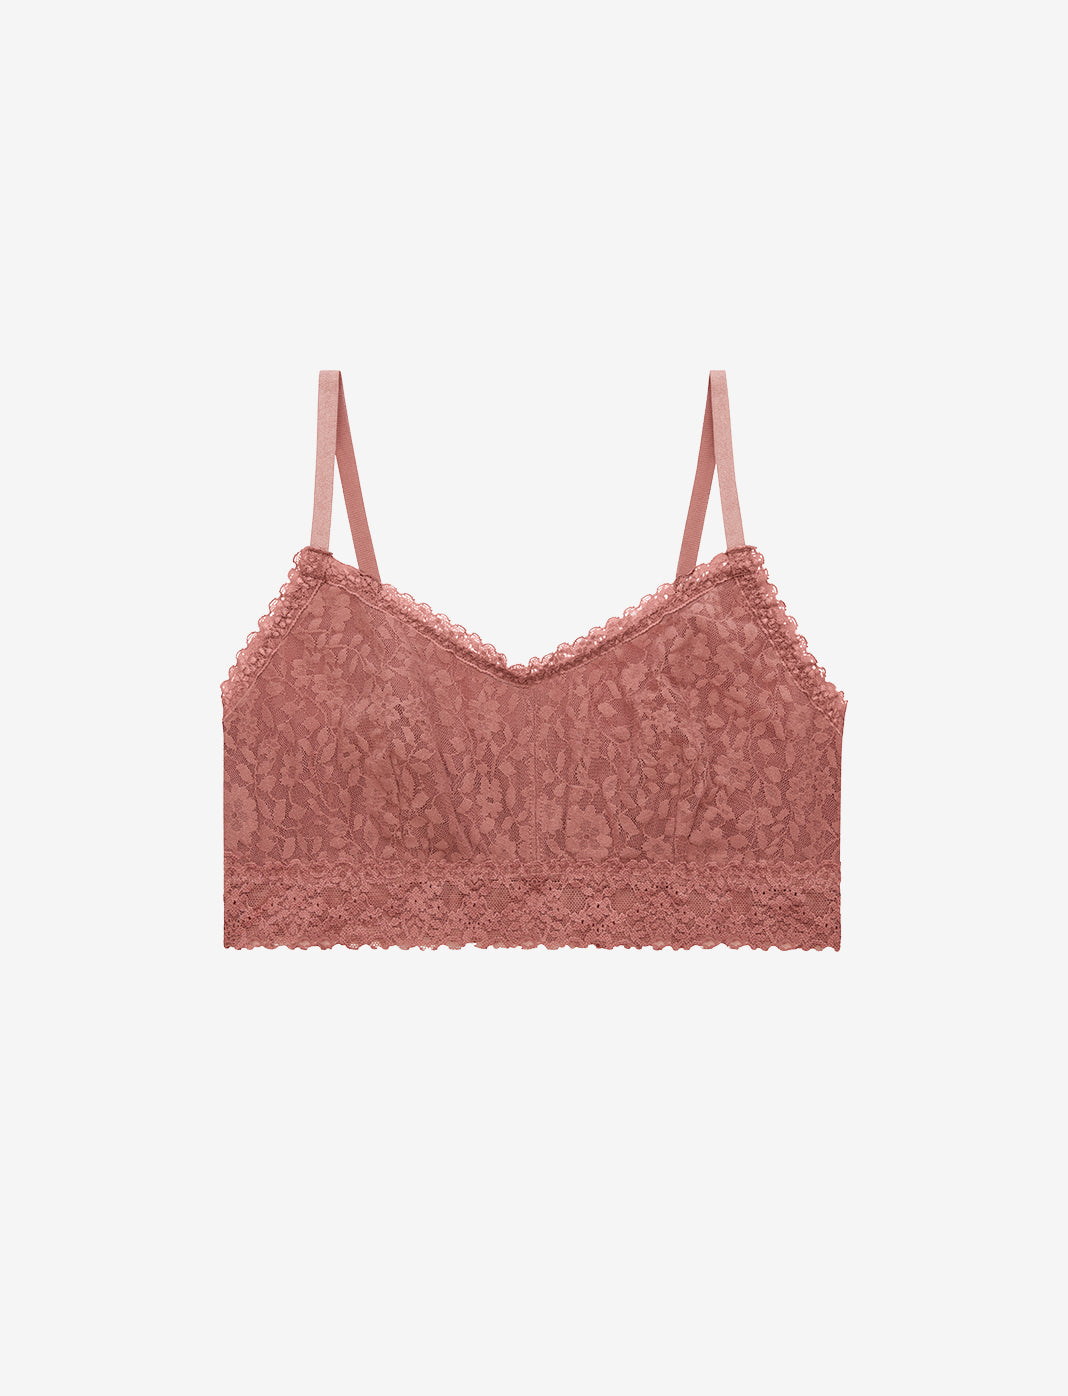 Everyday Lace Full Coverage Bralette - Comfortable Full Coverage Lace ...